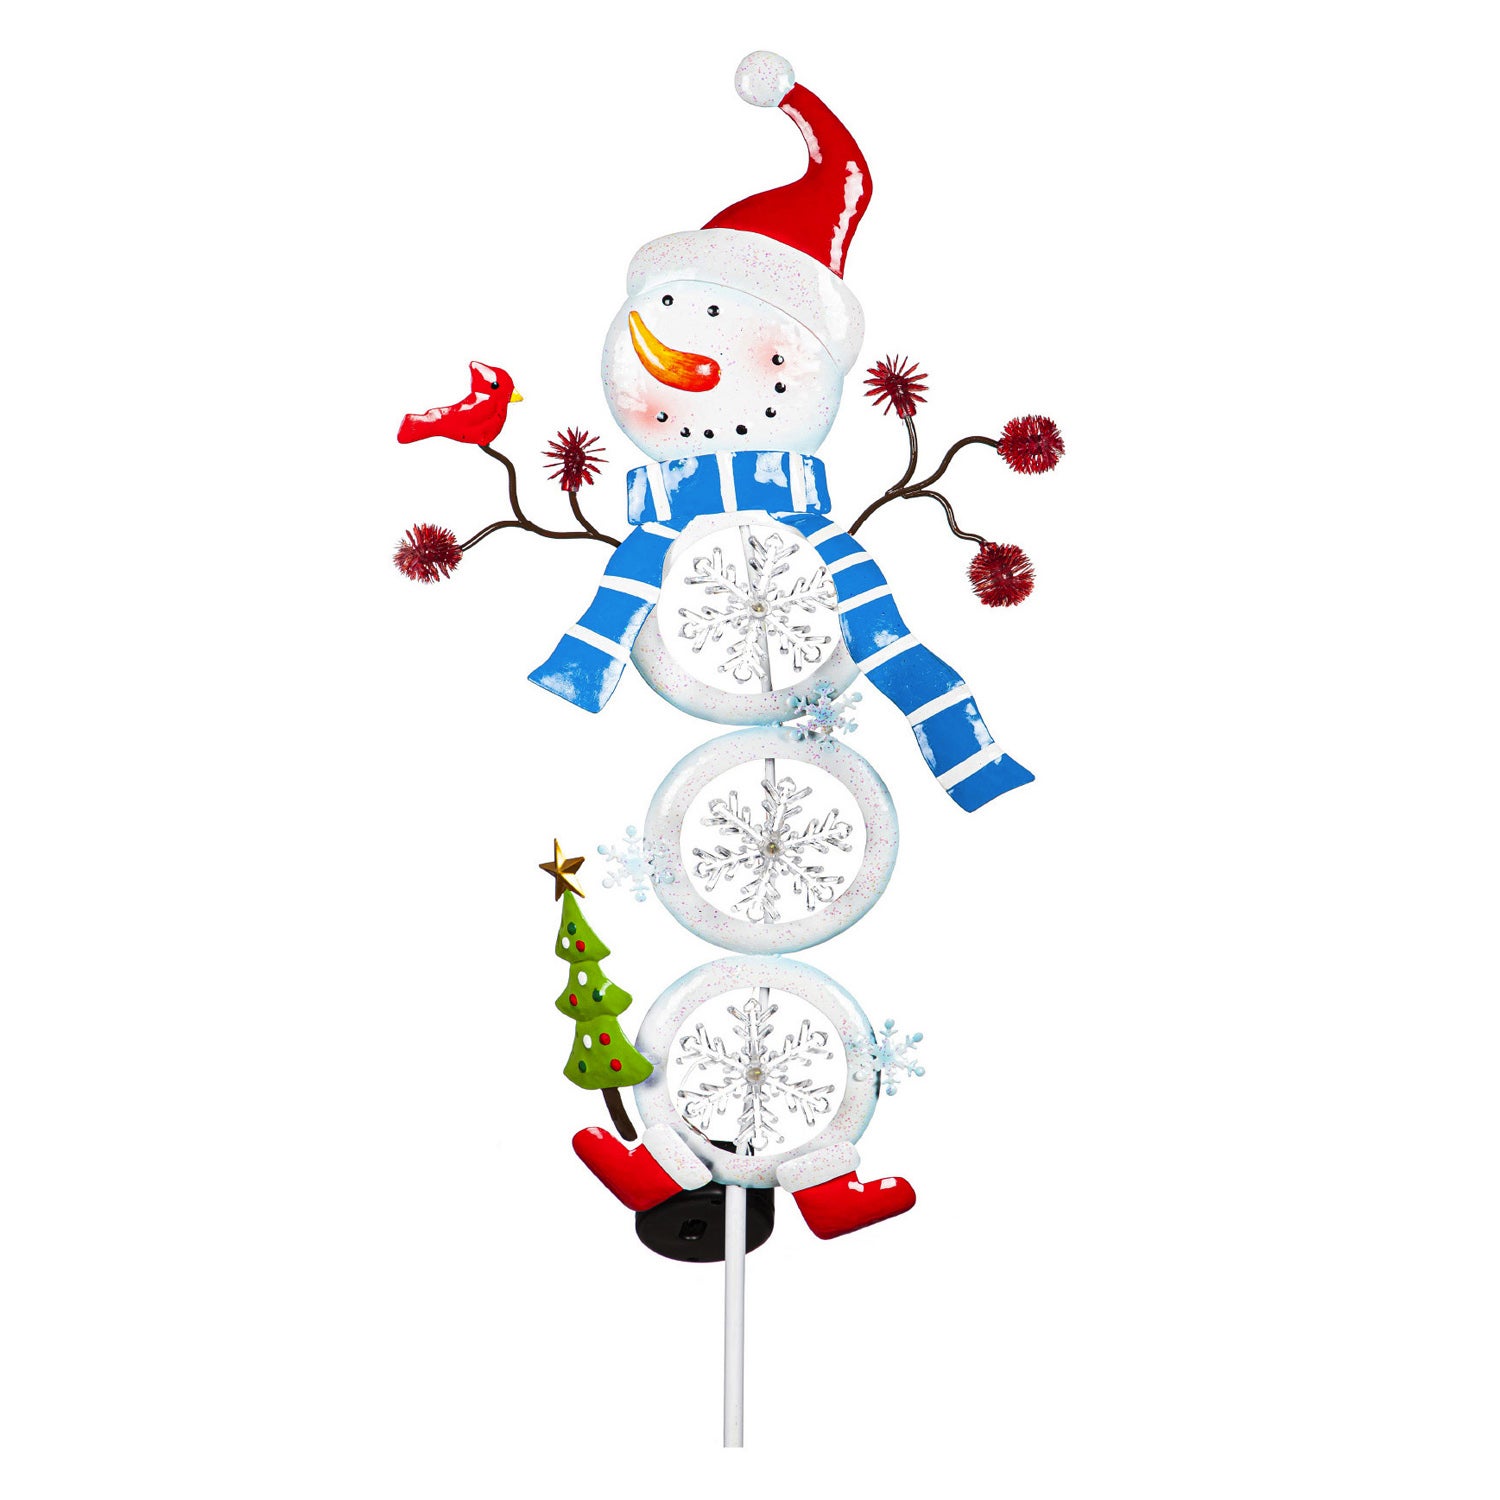 38"H Color Changing Stacked Snowman Solar Garden Stake, Snowflake